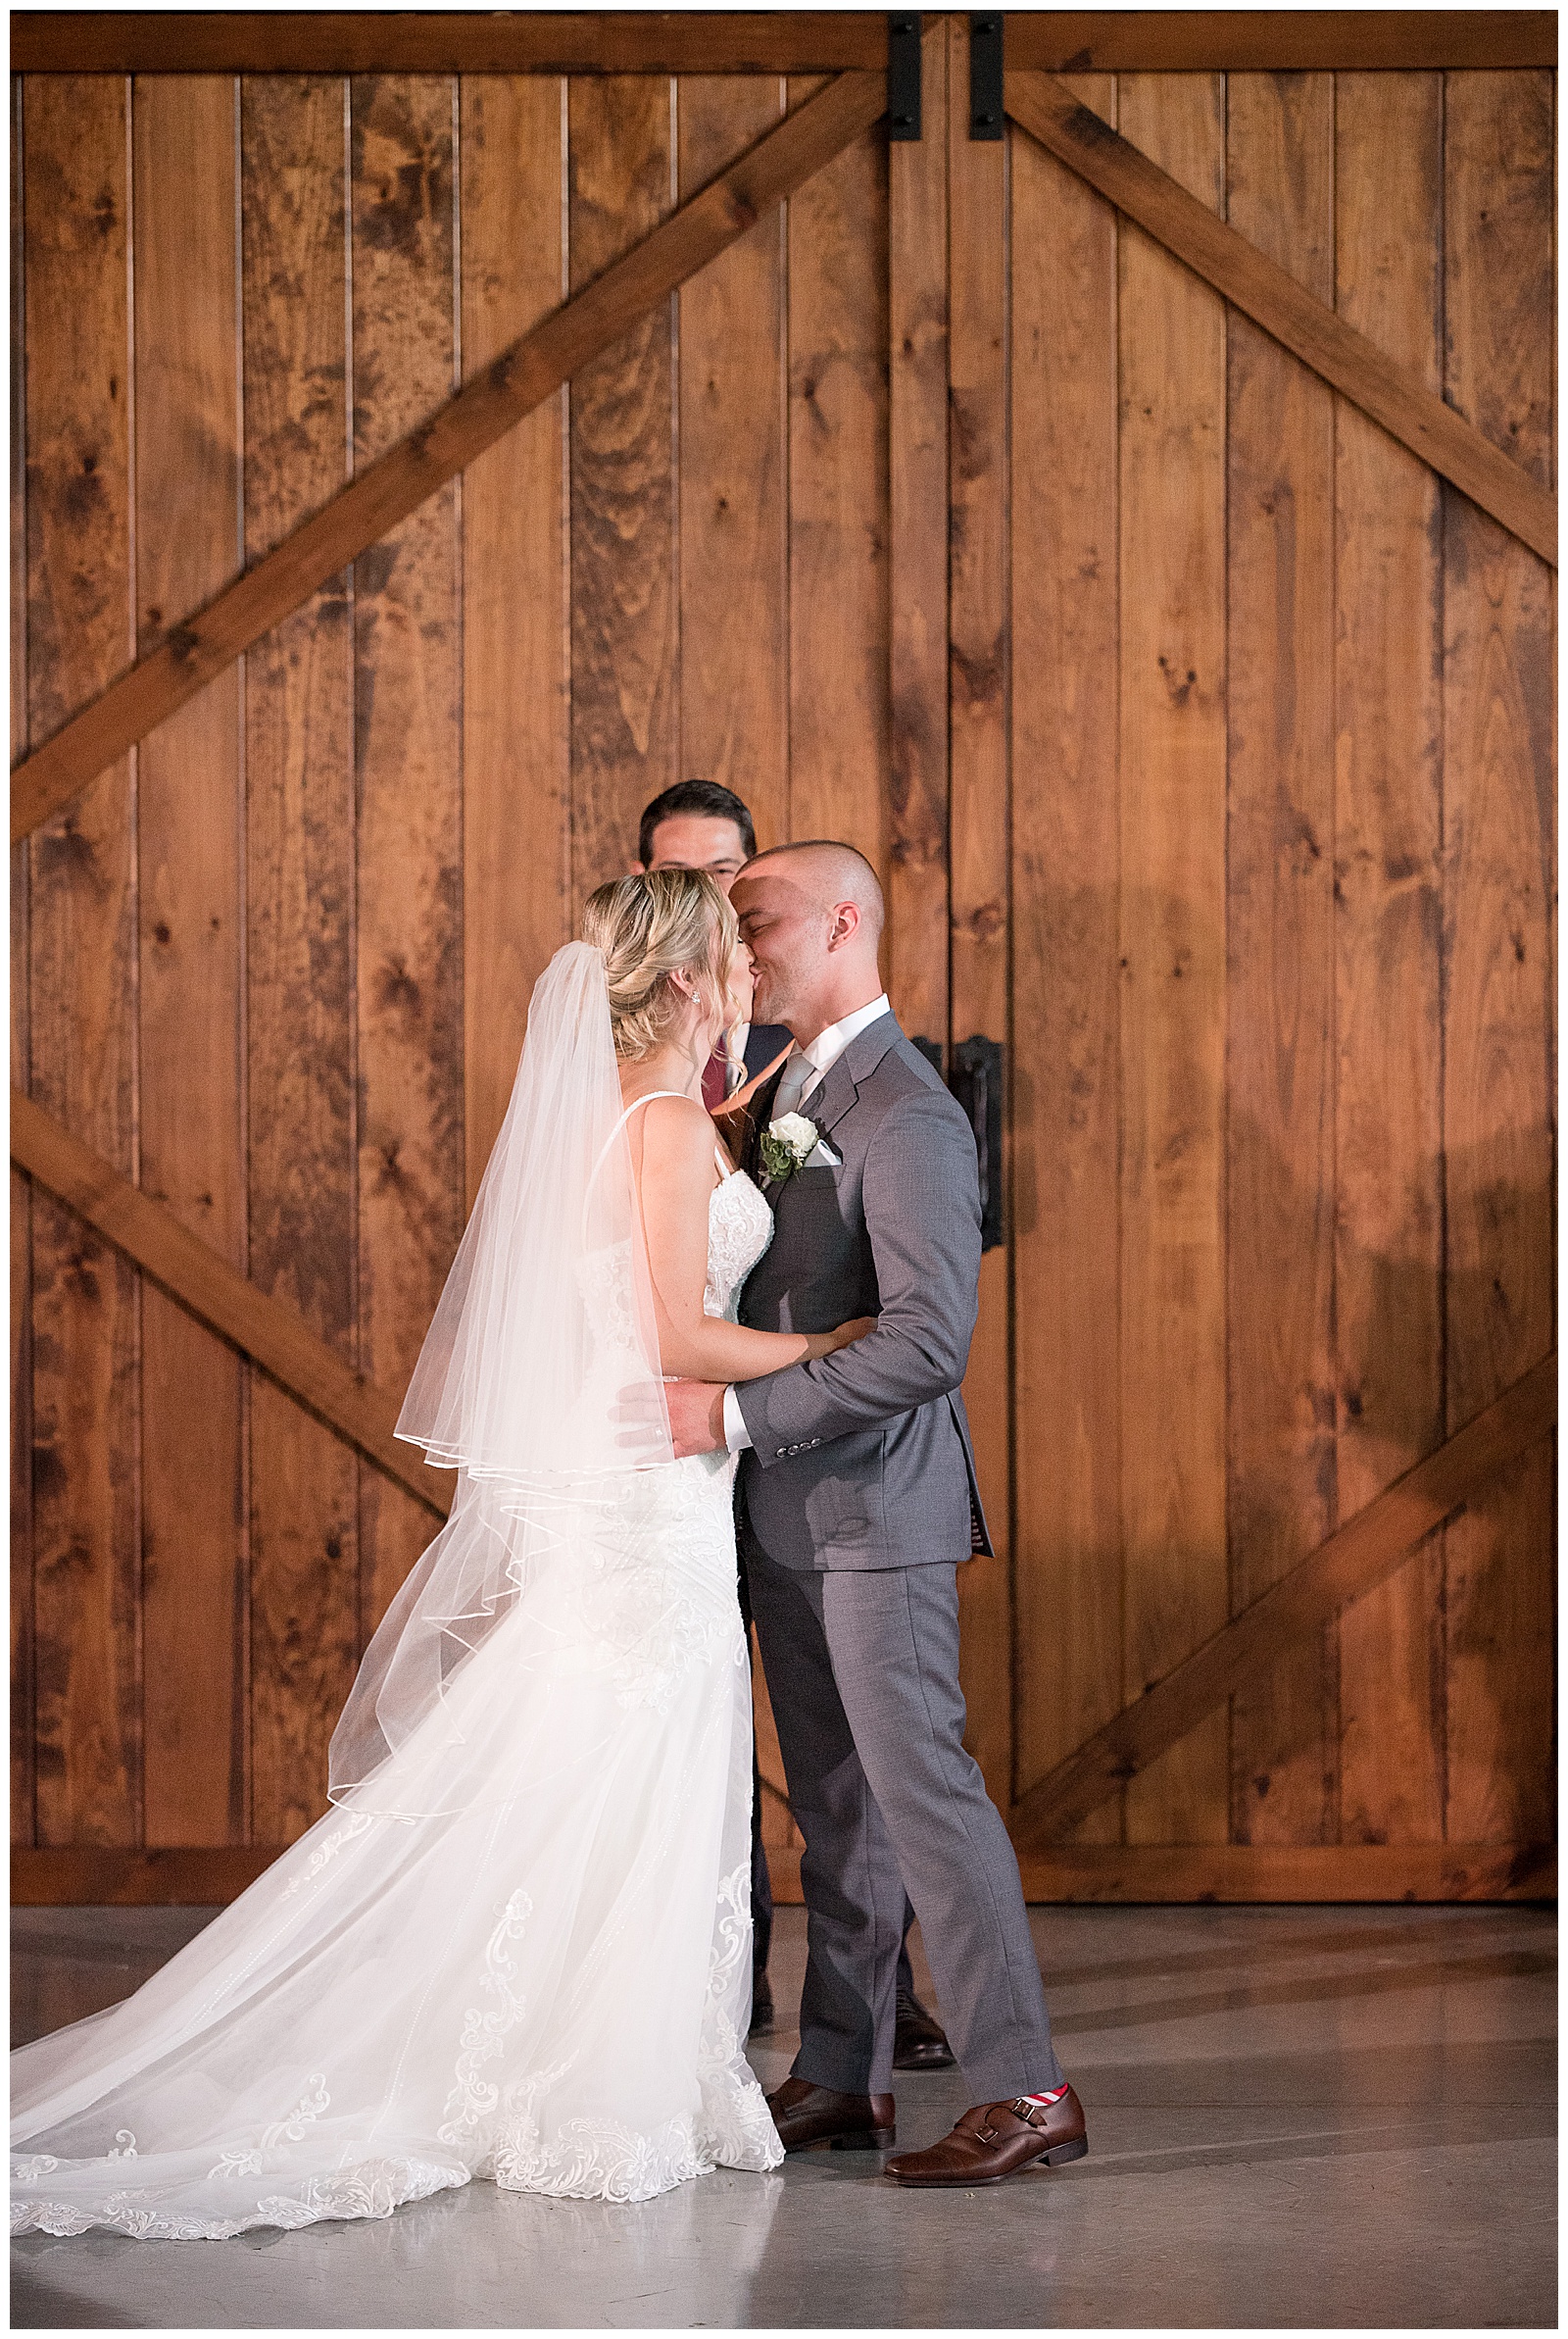 bride and groom kissing for the first time during wedding ceremony inside beautiful barn at the barn at silverstone